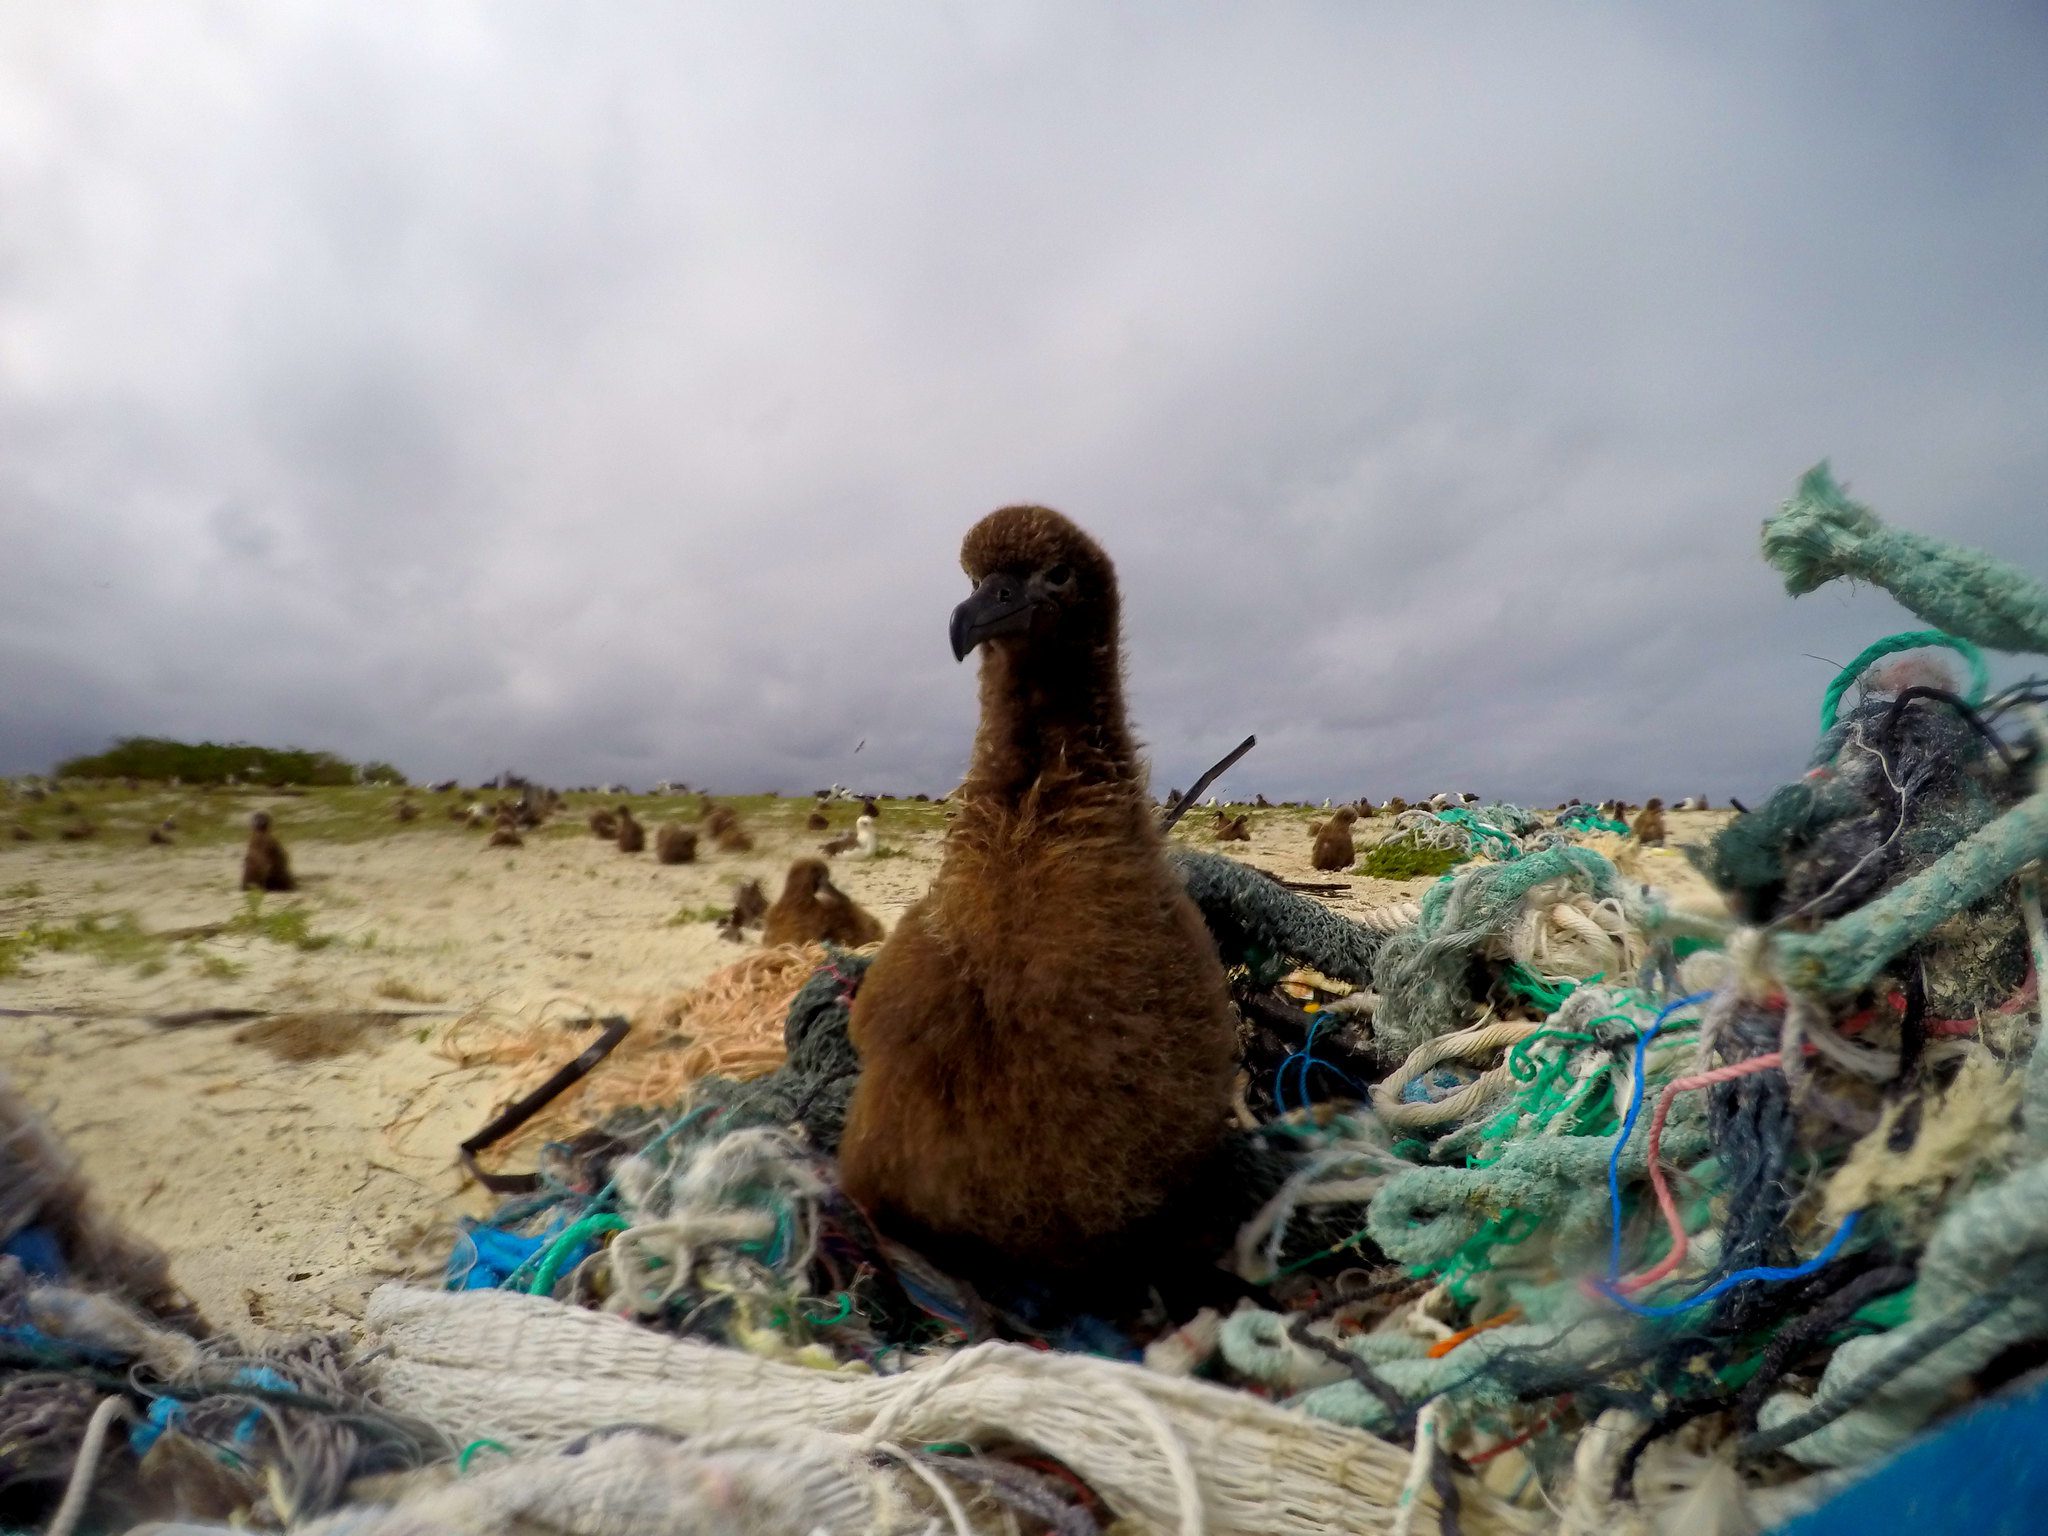 An albatross chick sits in a pile of marine debris.